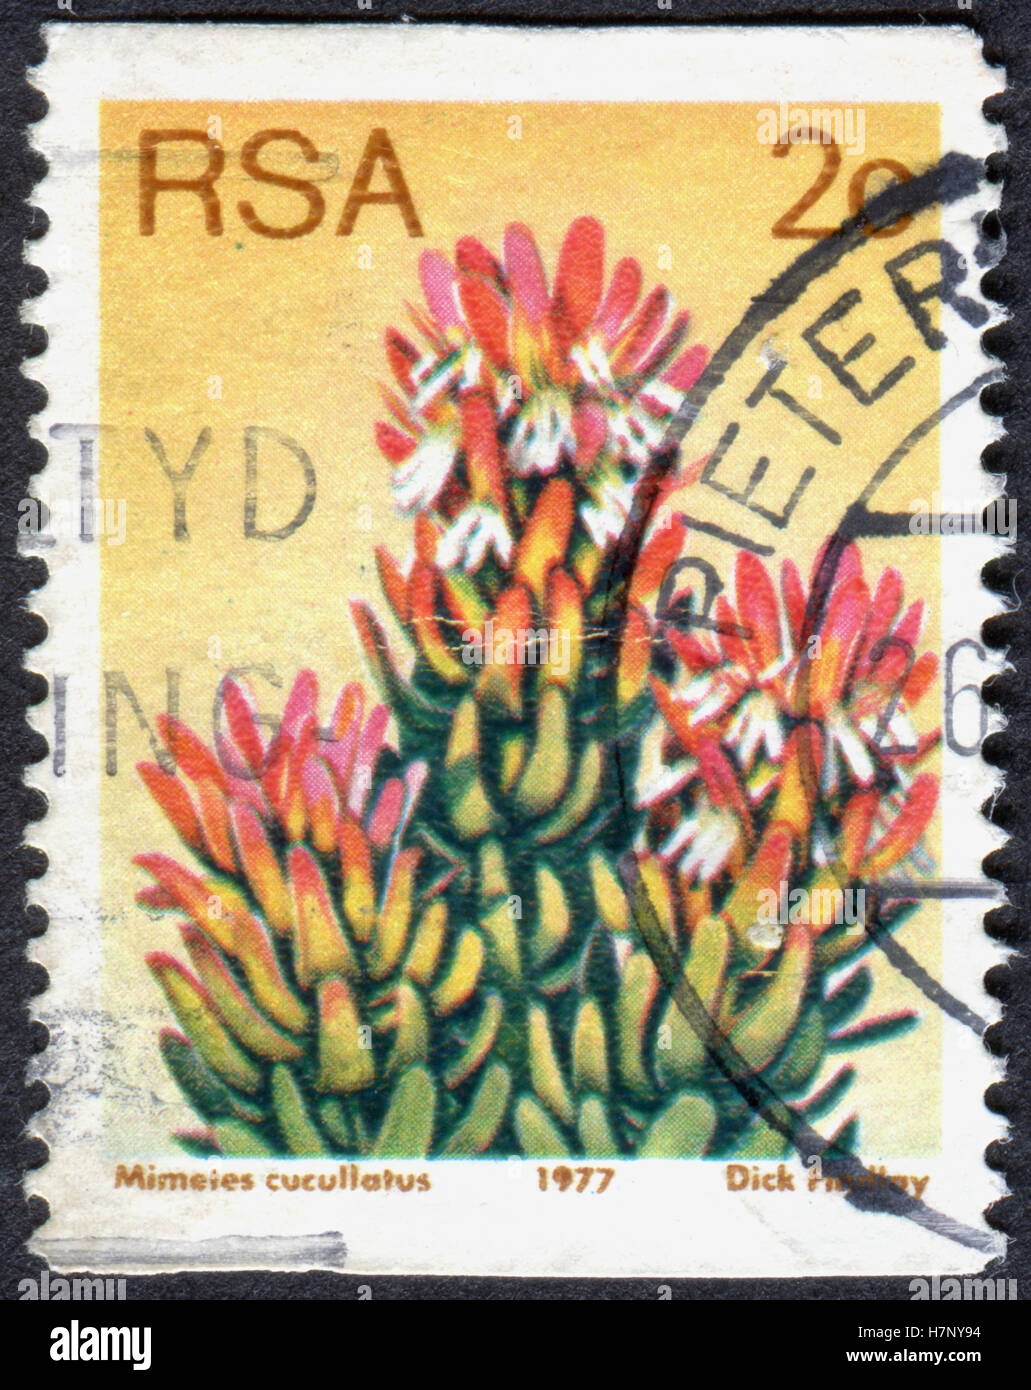 SOUTH AFRICA - CIRCA 1977: A stamp printed in South Africa, shows a plant Protea punctata, circa 1977 Stock Photo